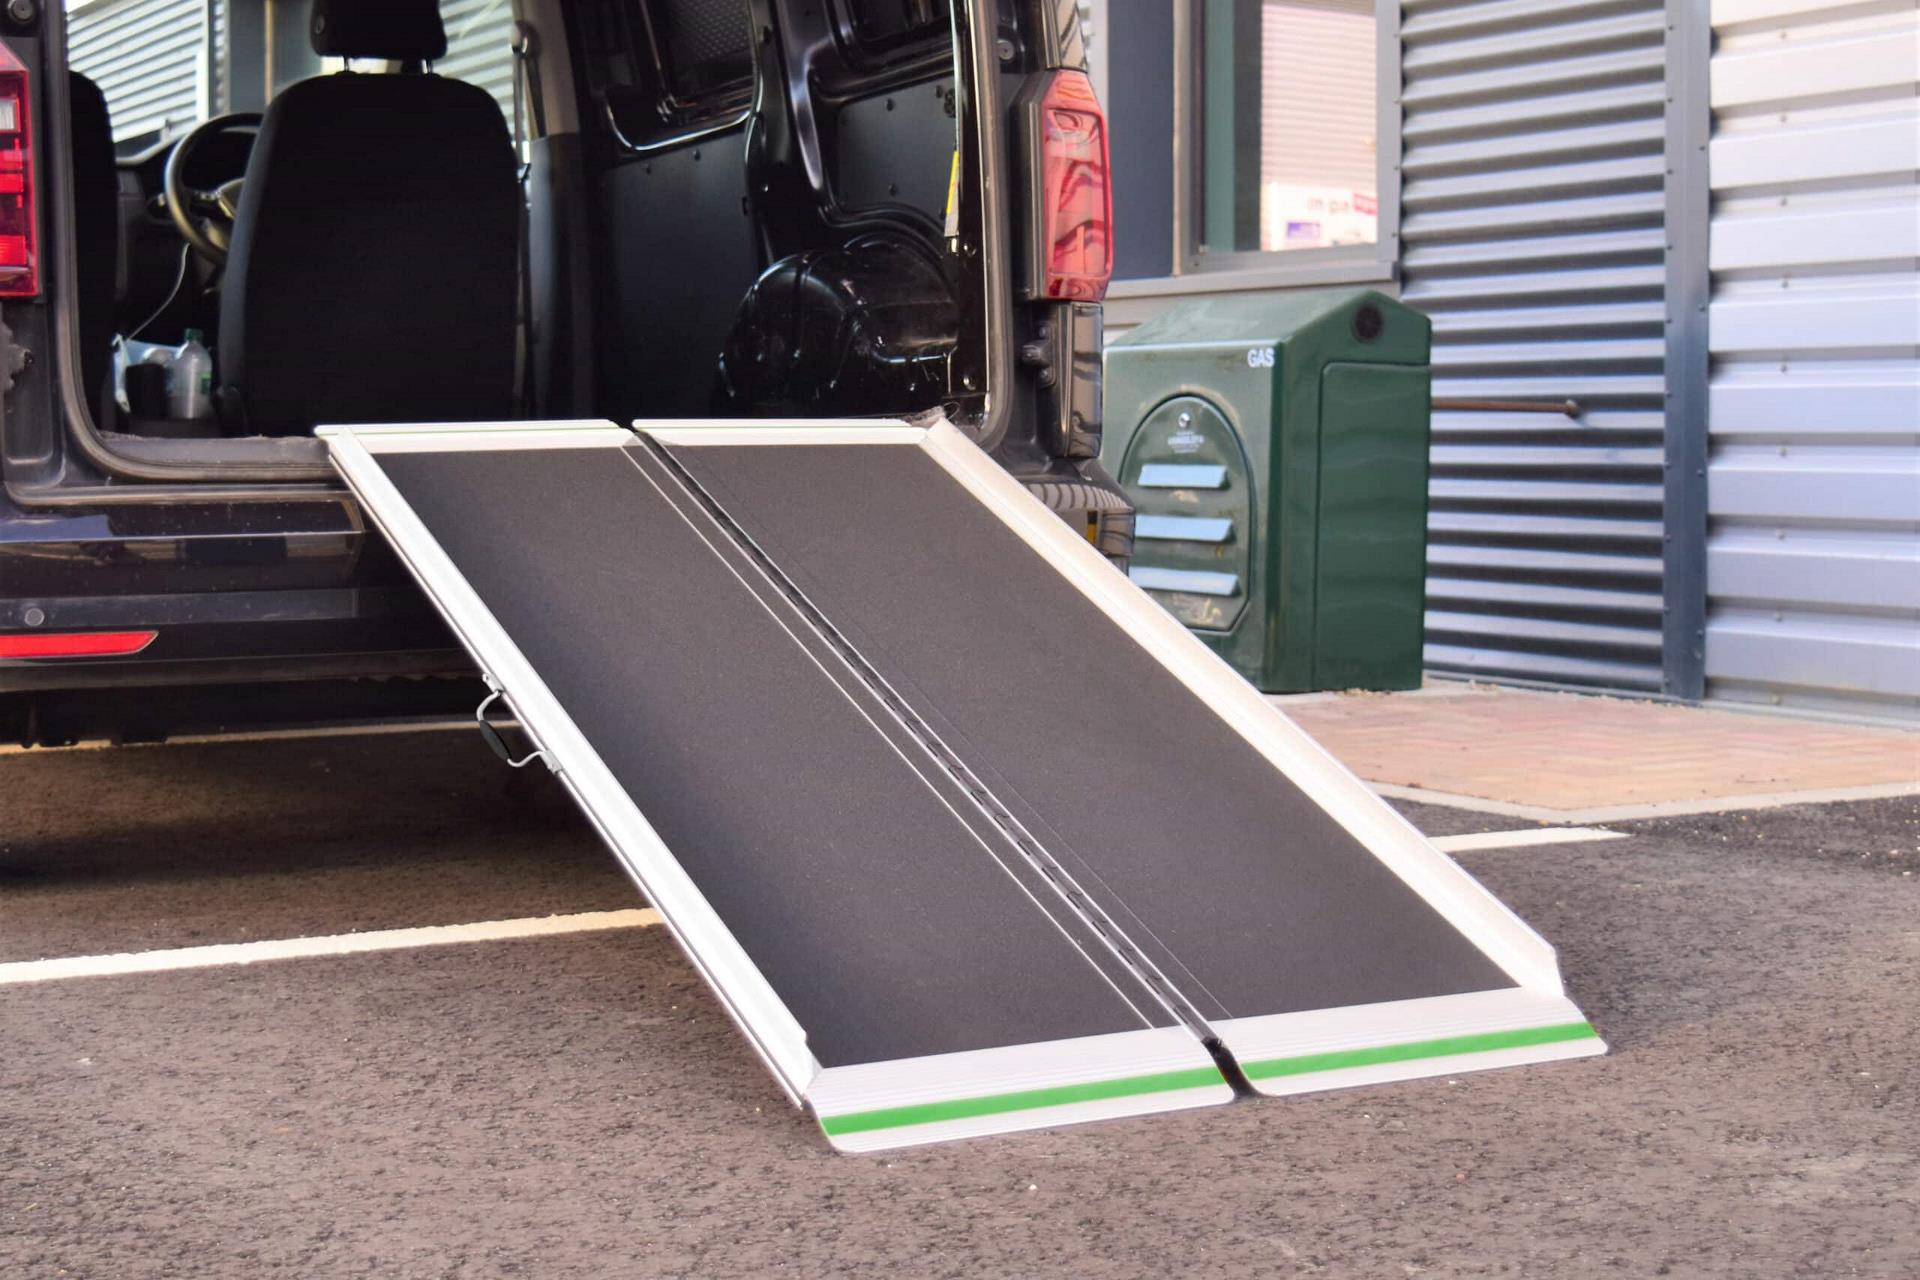 Enable-Access-Aerolight-Max-scaled-commercial-portable-ramp-easycare-systems1.jpeg